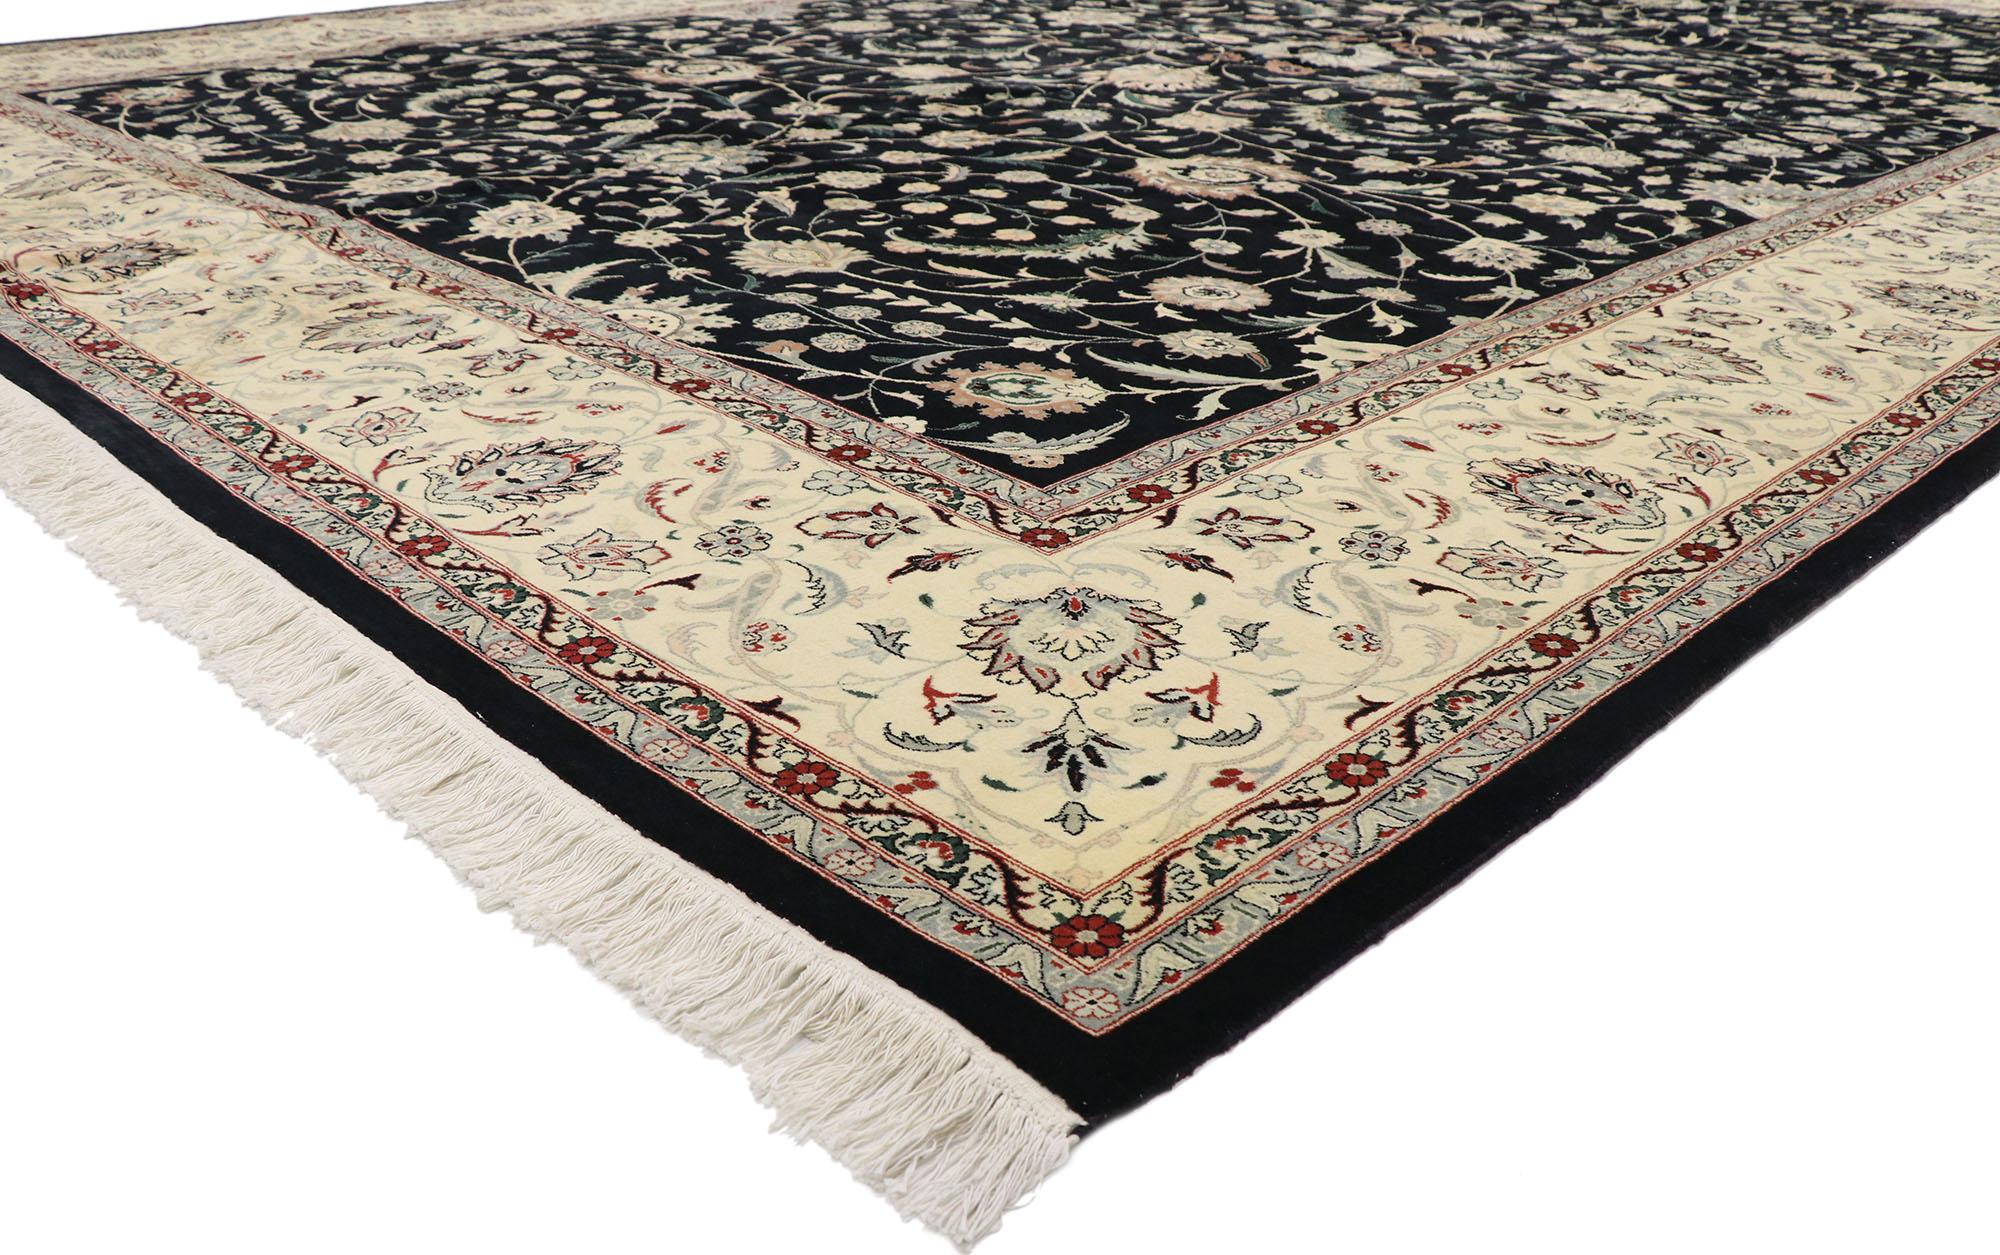 77747, vintage Persian Tabriz Pakistani rug with Neoclassical Baroque style. Sure to captivate the most discerning aesthete, this hand knotted wool vintage Persian Tabriz style rug is the epitome of tradition and Victorian in one. The black field